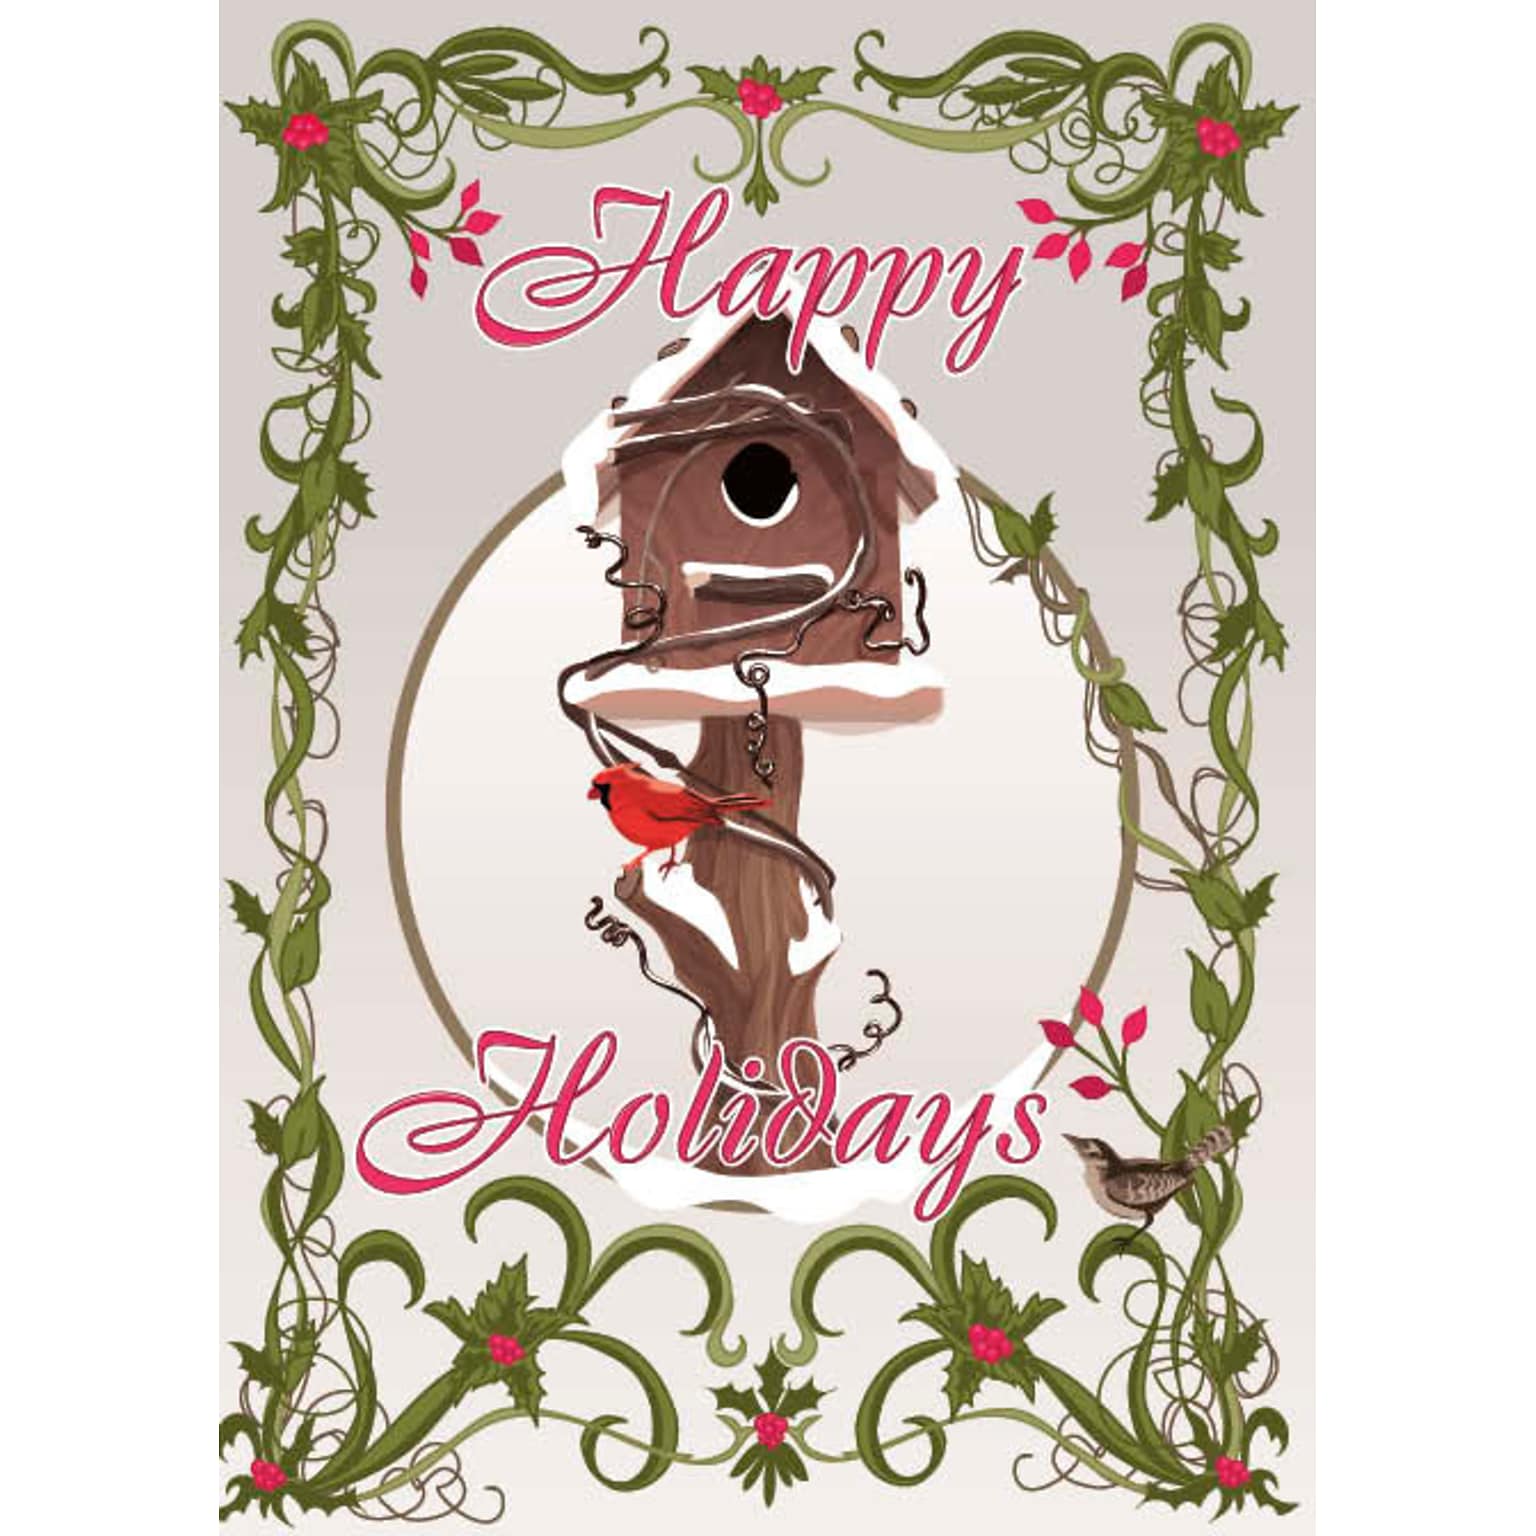 Happy Holidays Cardinal And Bird House Holiday Greeting Cards, With A7 Envelopes, 7 x 5, 25 Cards per Set